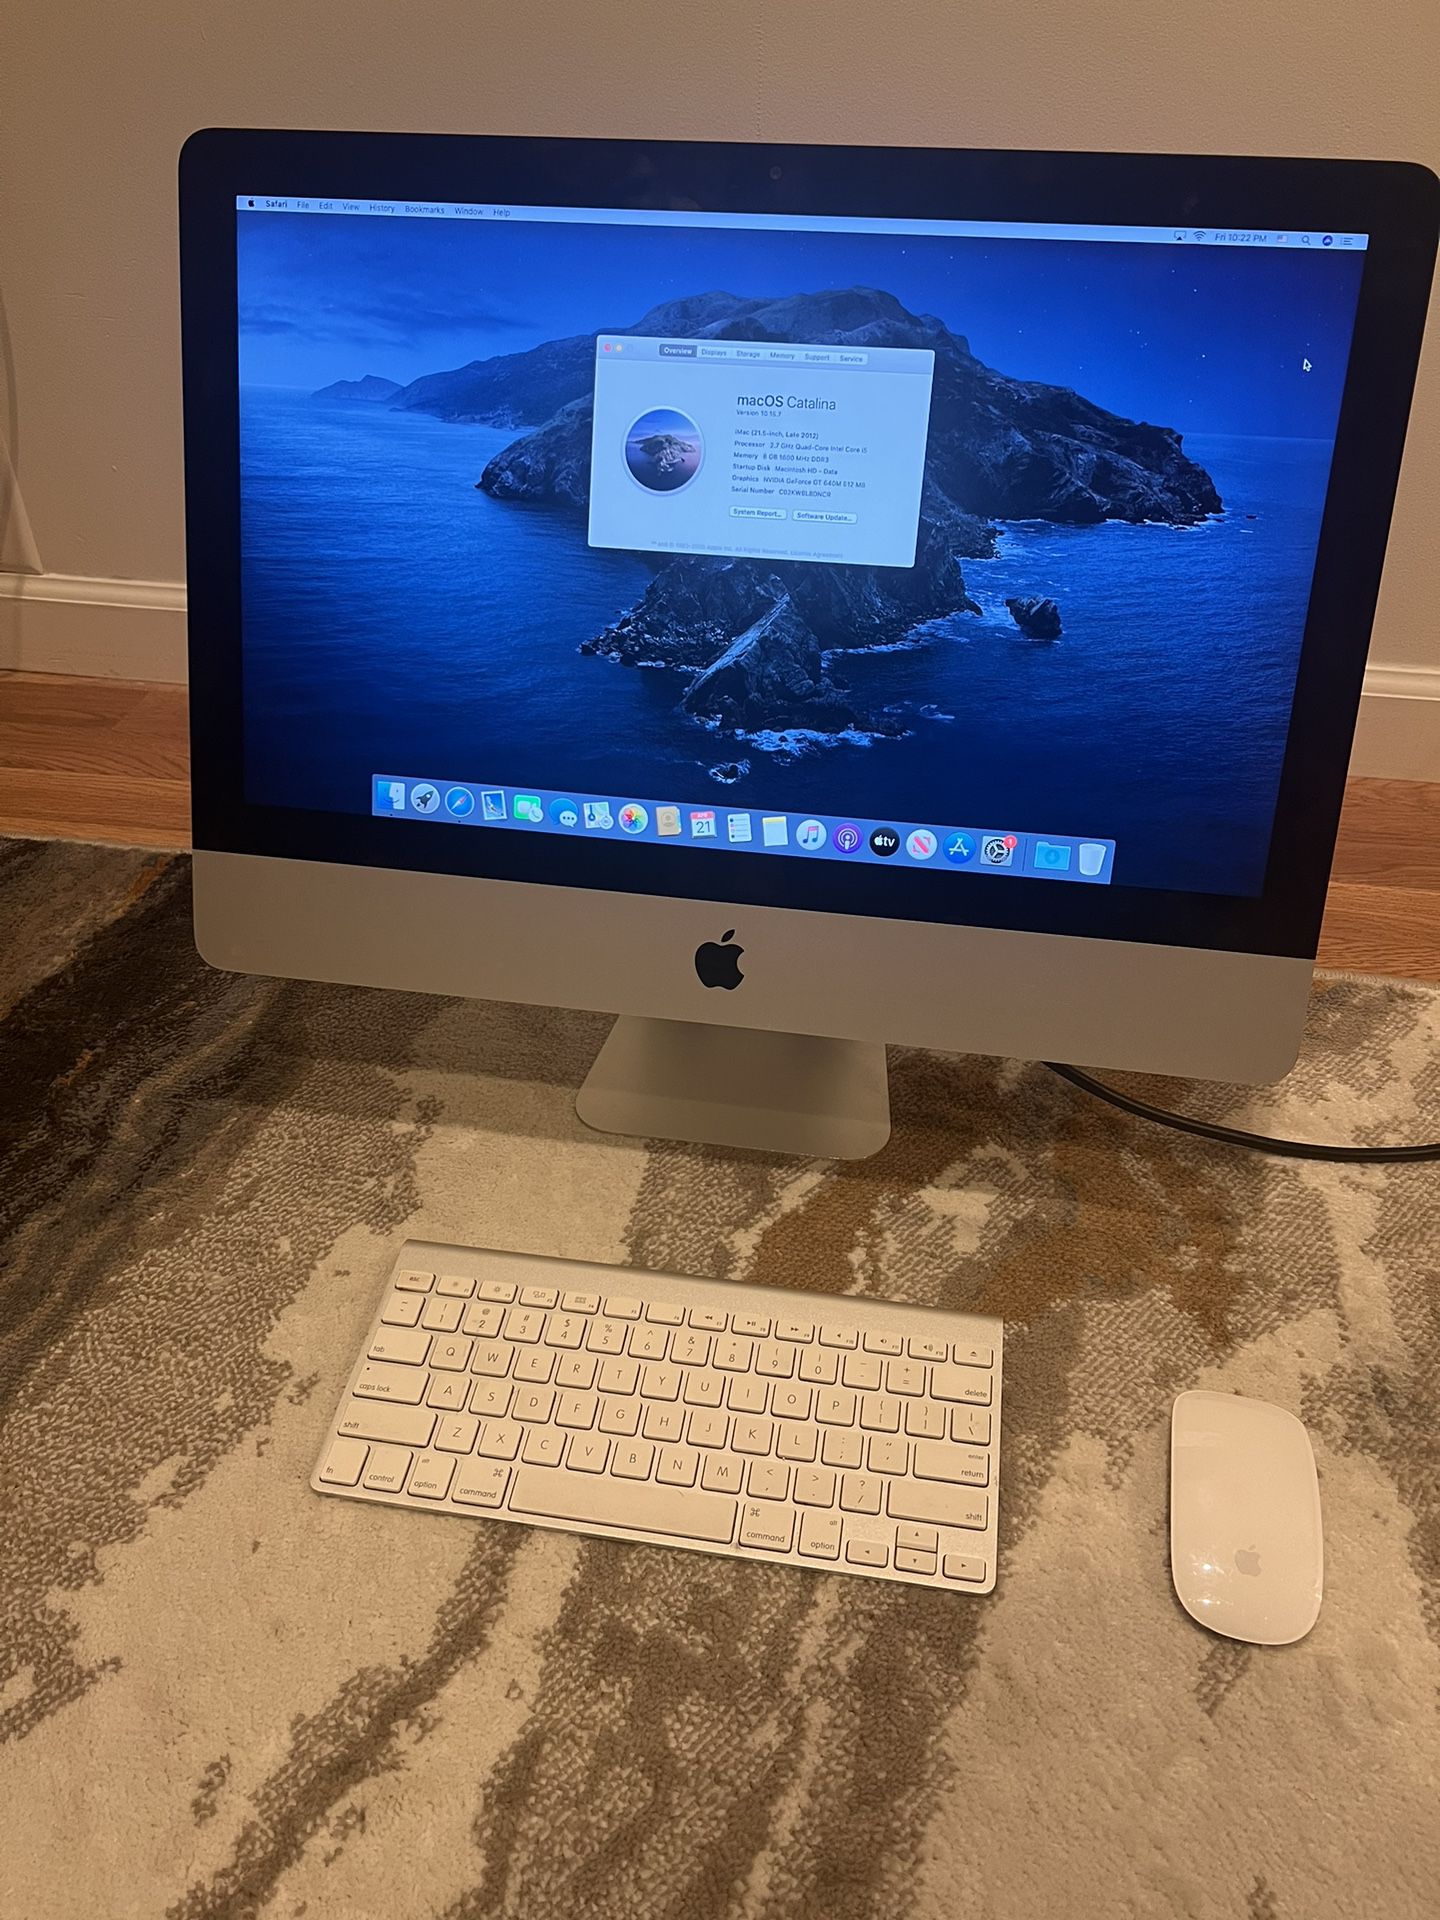 Stoel Experiment bank Apple iMac 2012 21.5” Intel Core i5 1TB Storage With Bluetooth Keyboard And  Magic Mouse for Sale in Scarsdale, NY - OfferUp